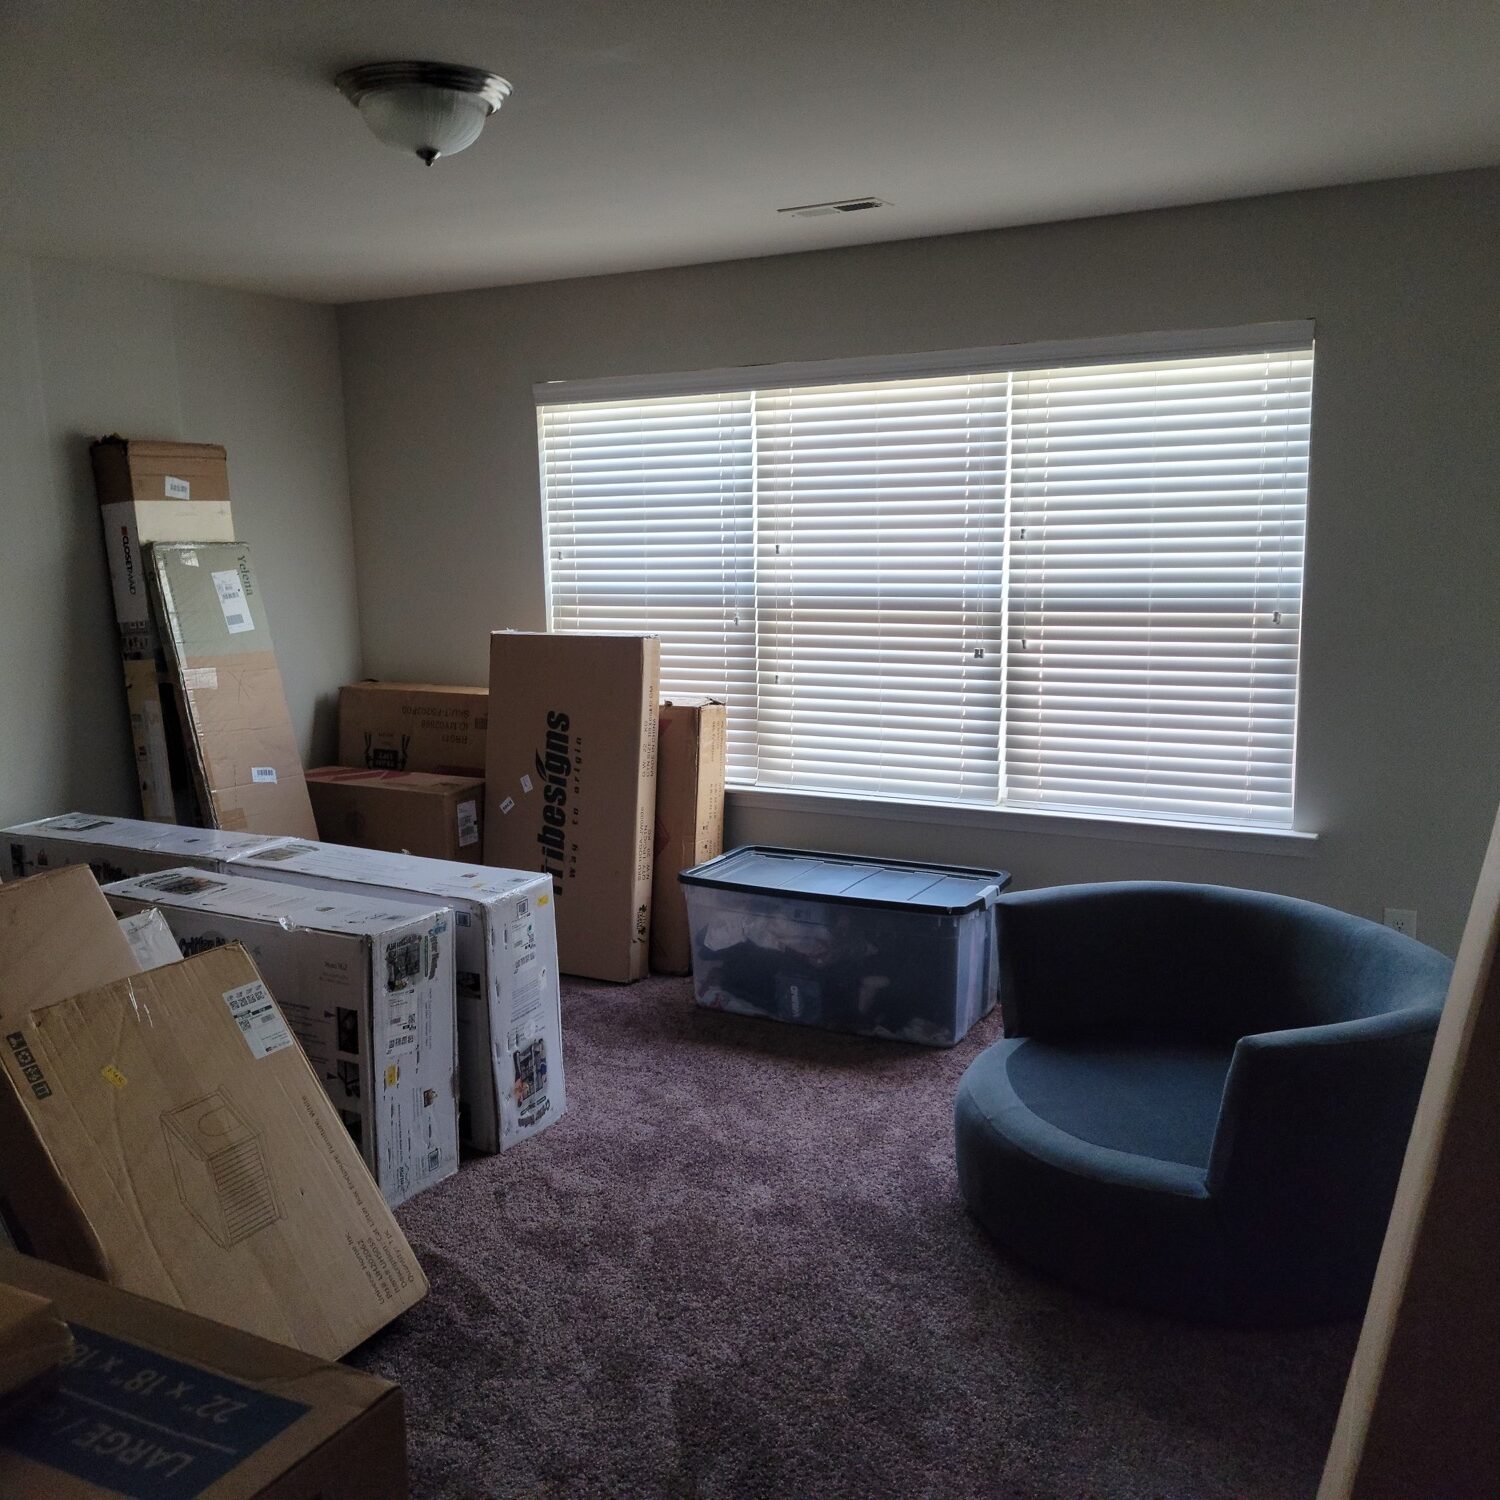 moved 21 boxes and a chair up stairs